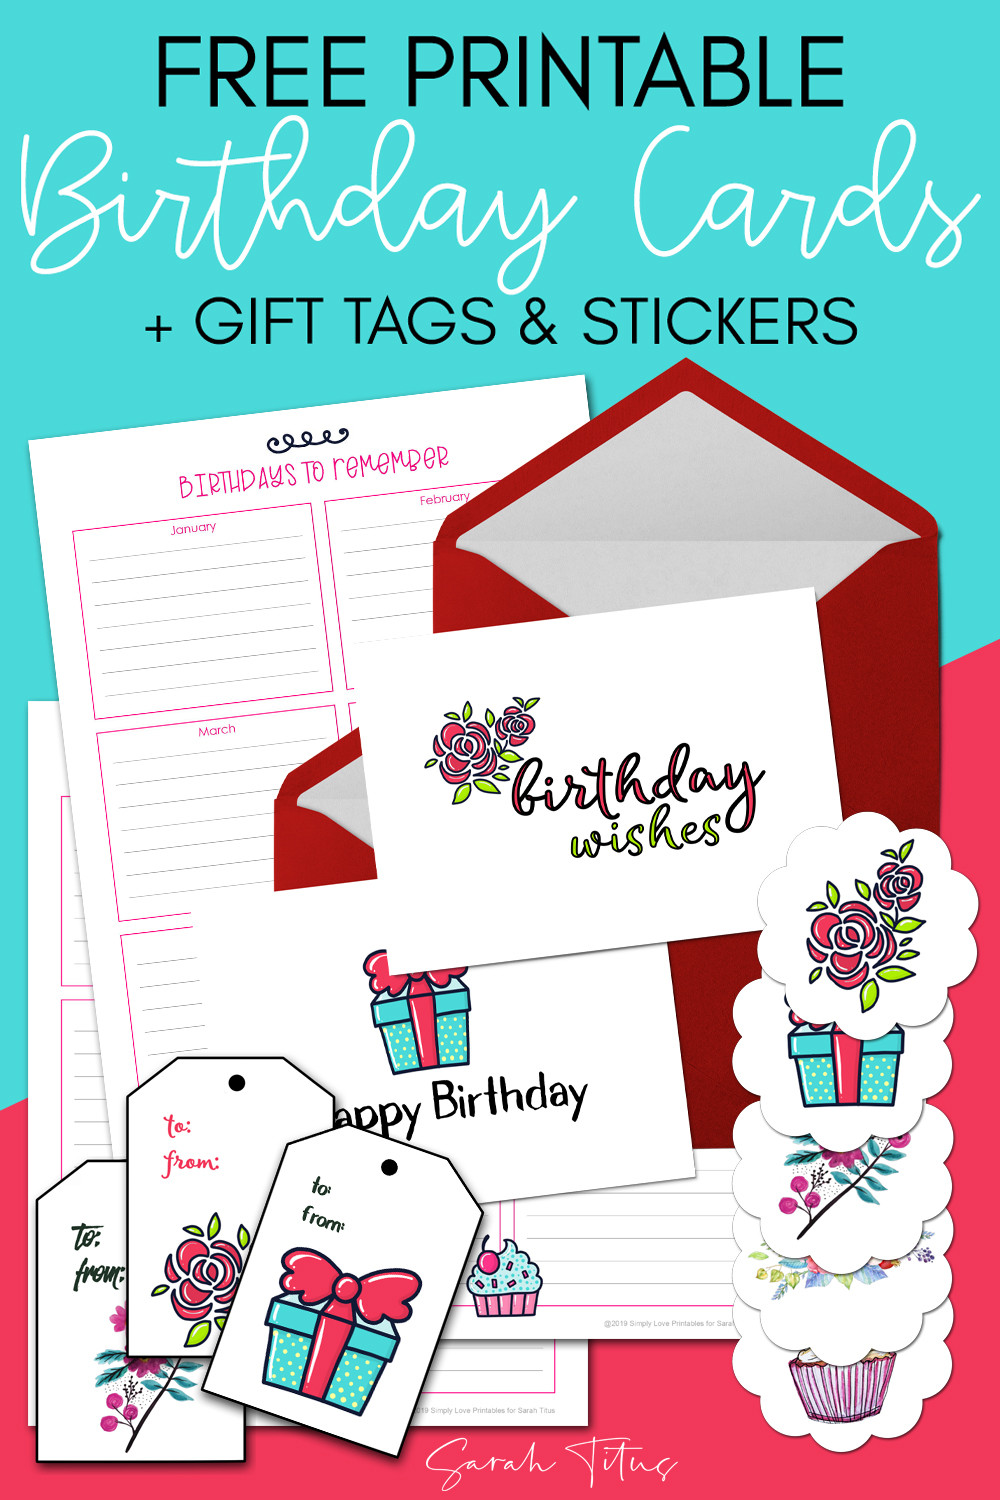 Print Birthday Cards
 Free Printable Birthday Cards Gift Tags & Stickers